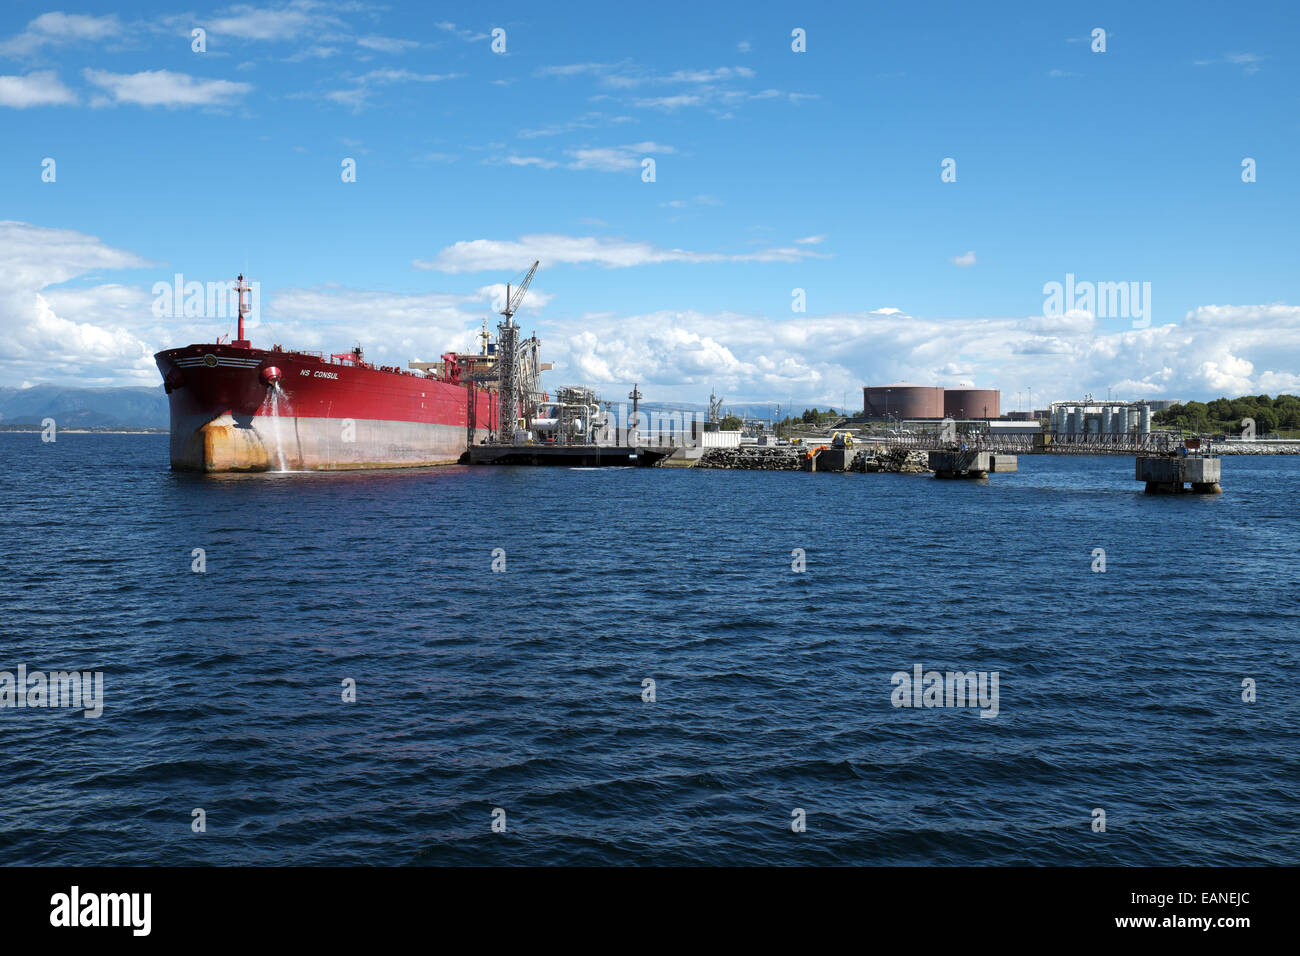 Crude Oil Tanker, NS Consul - Mongstad Oil Refinery, Hordaland, Norway. Stock Photo